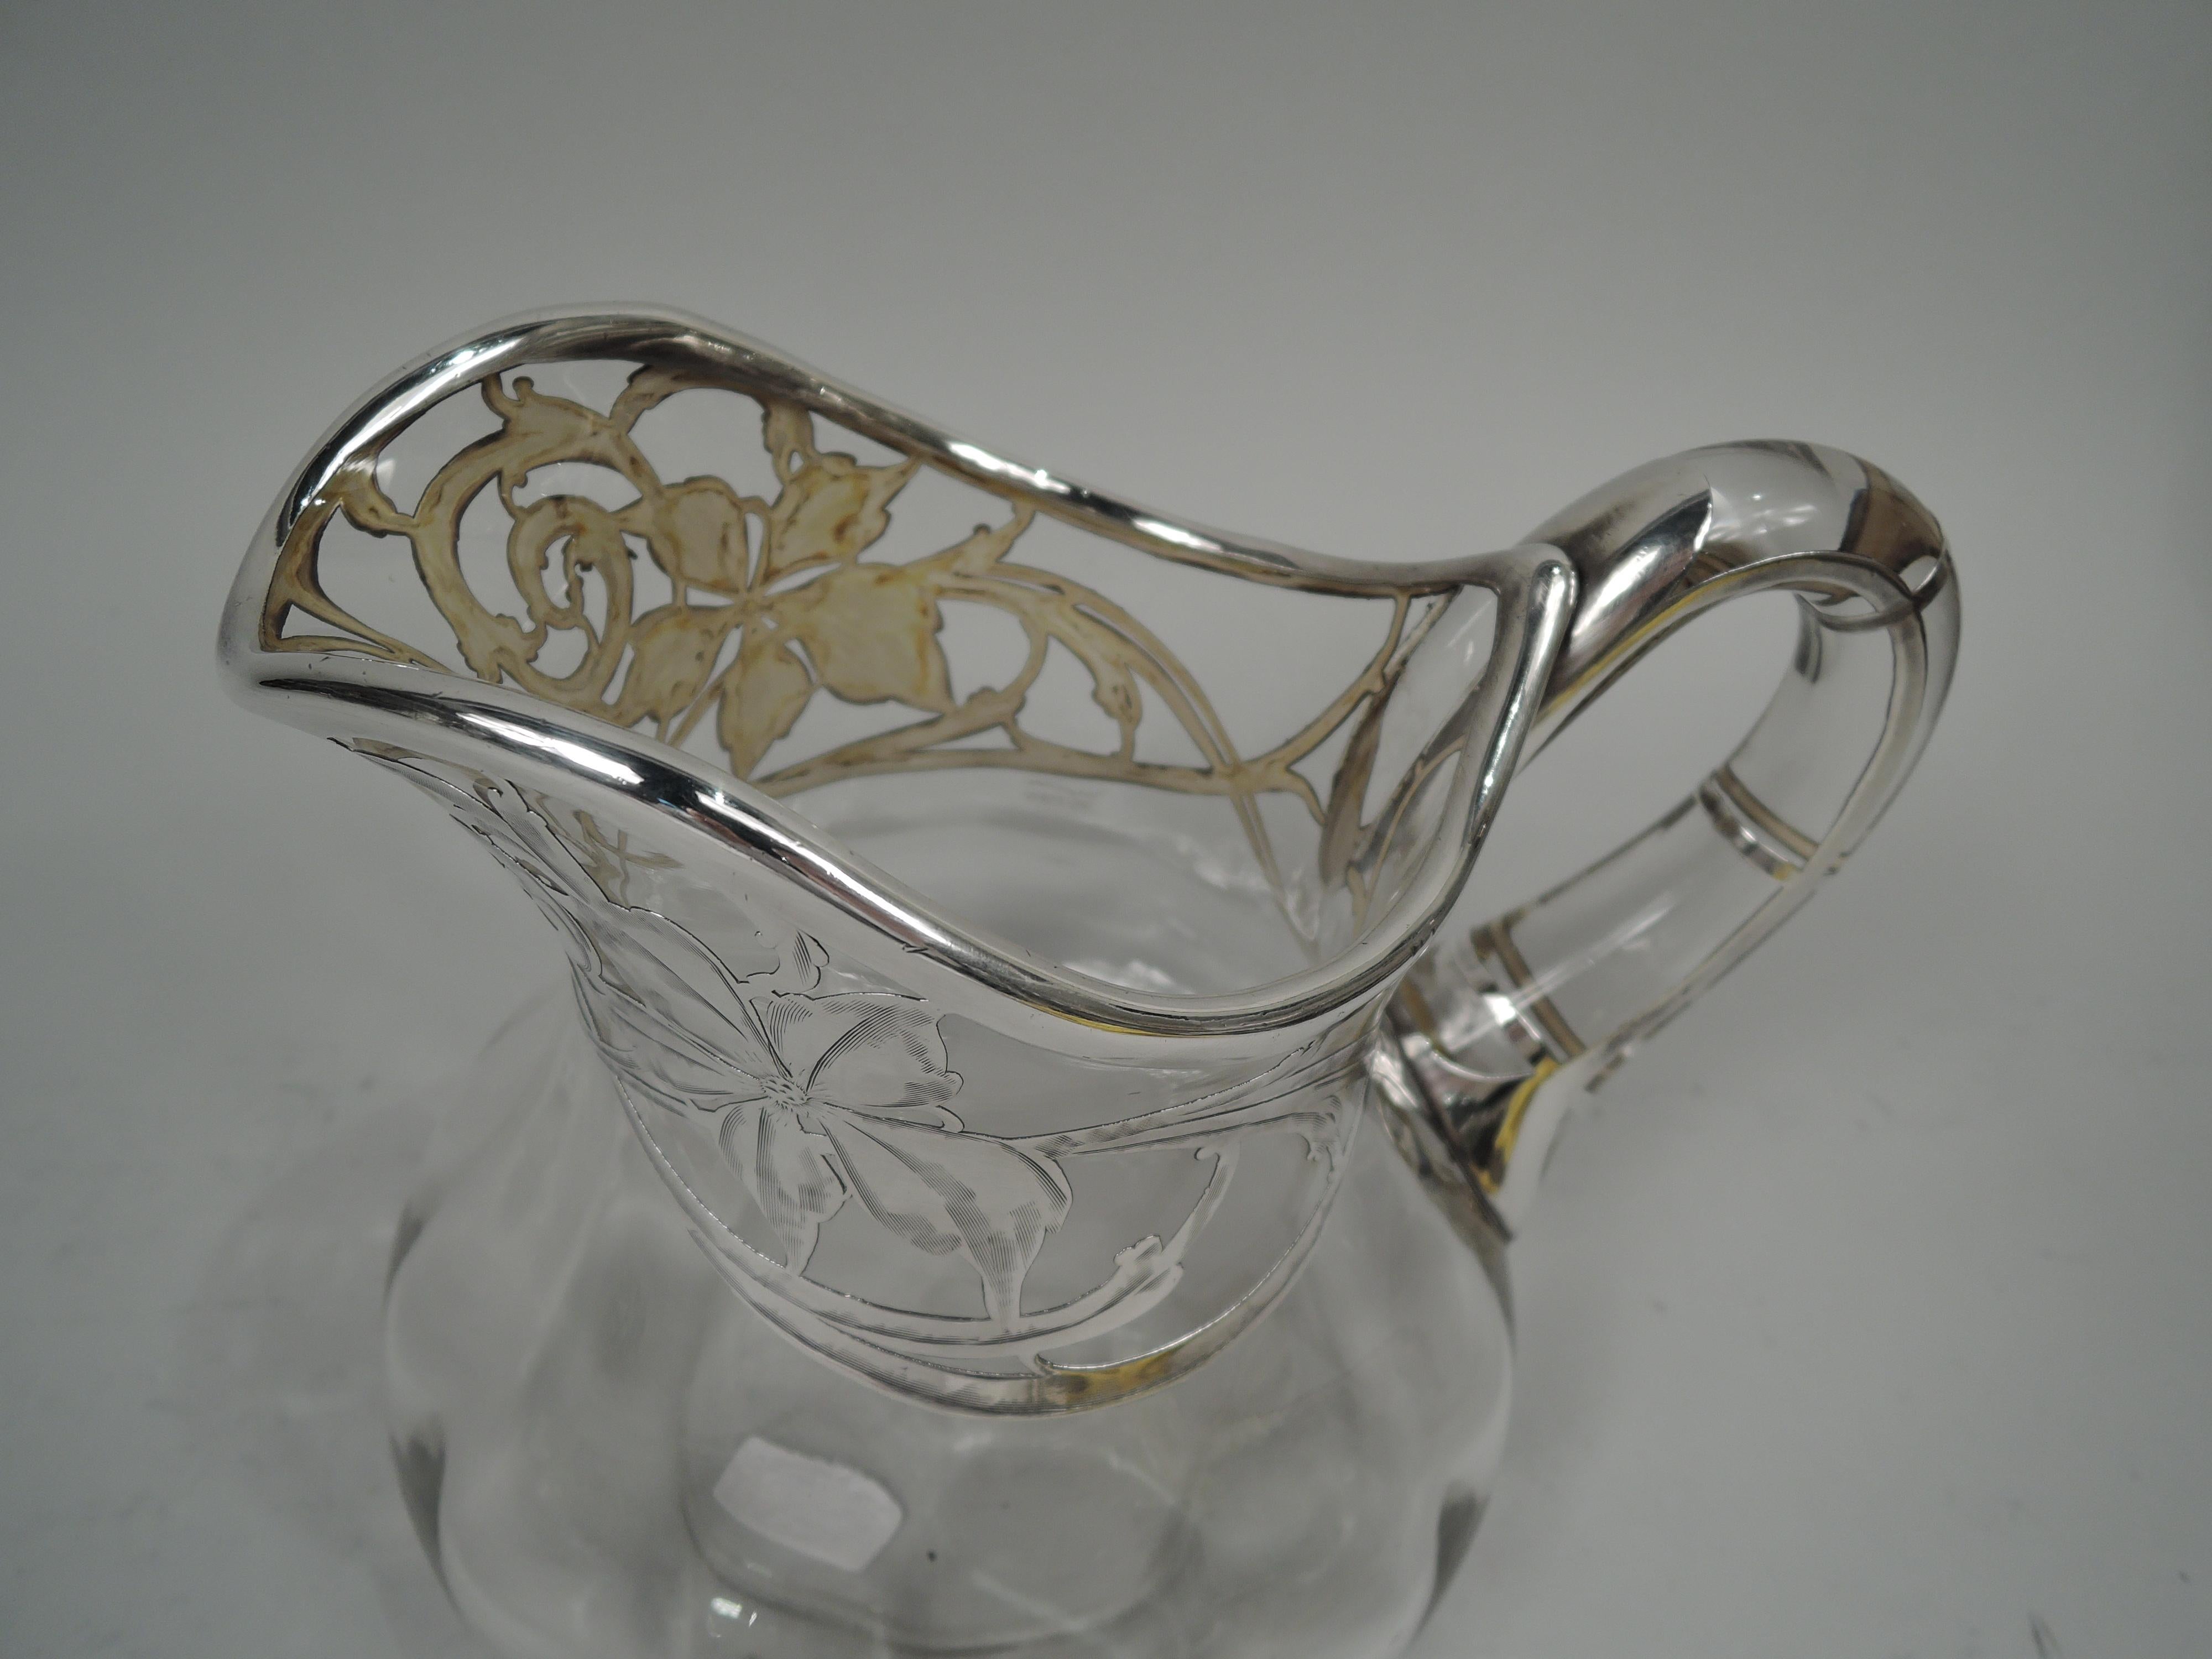 20th Century Antique American Art Nouveau Silver Overlay Water Pitcher